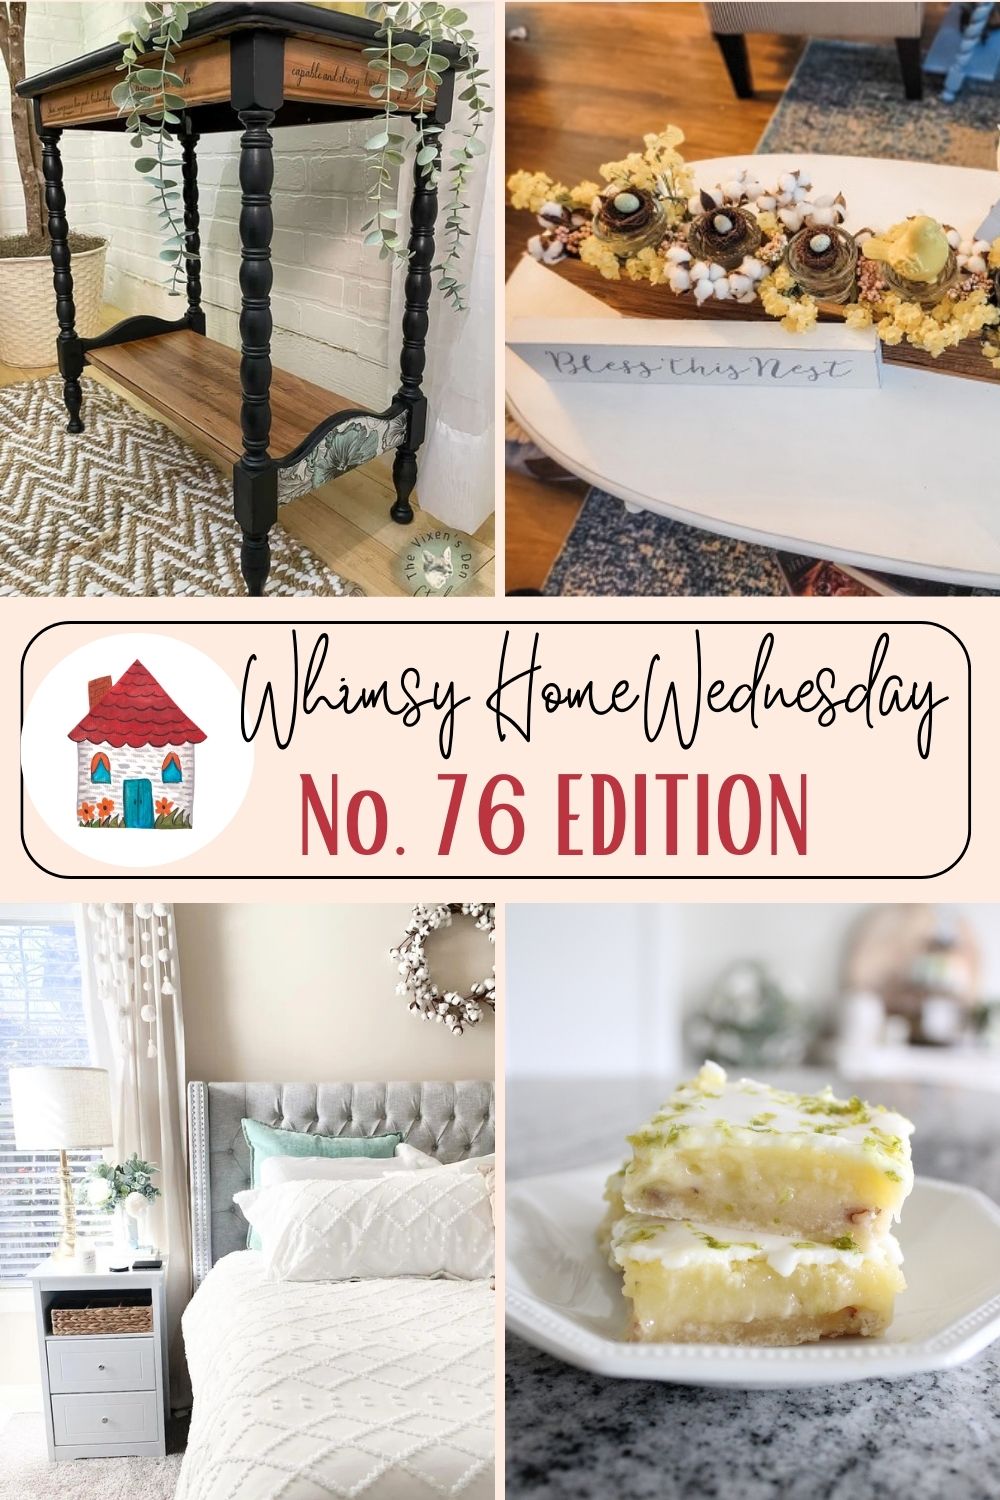 Join us on Whimsy Home Wednesday Blog Link Party No. 76 and see host projects, the features from the previous week and link up your posts!